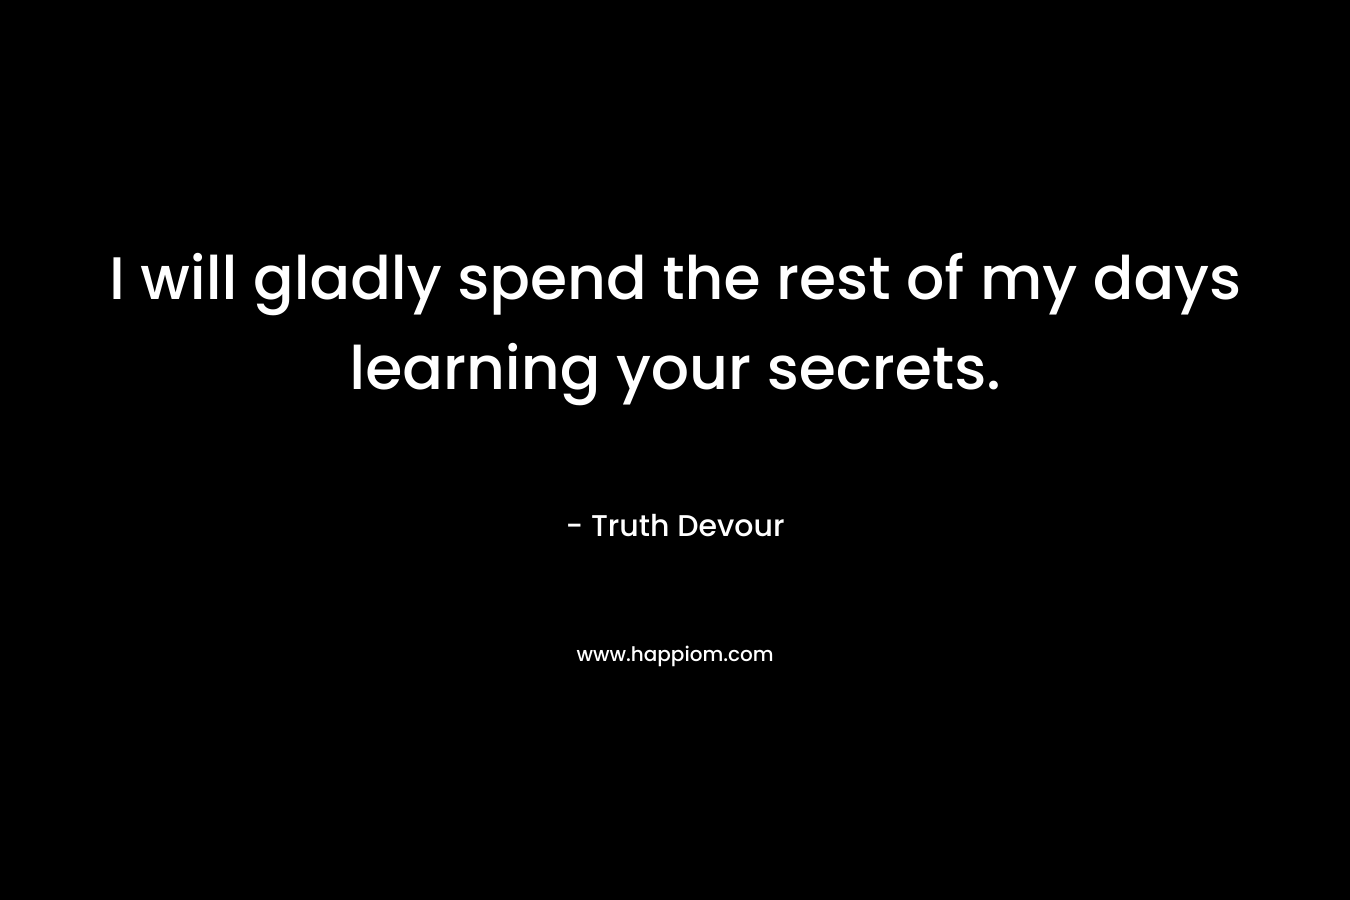 I will gladly spend the rest of my days learning your secrets.